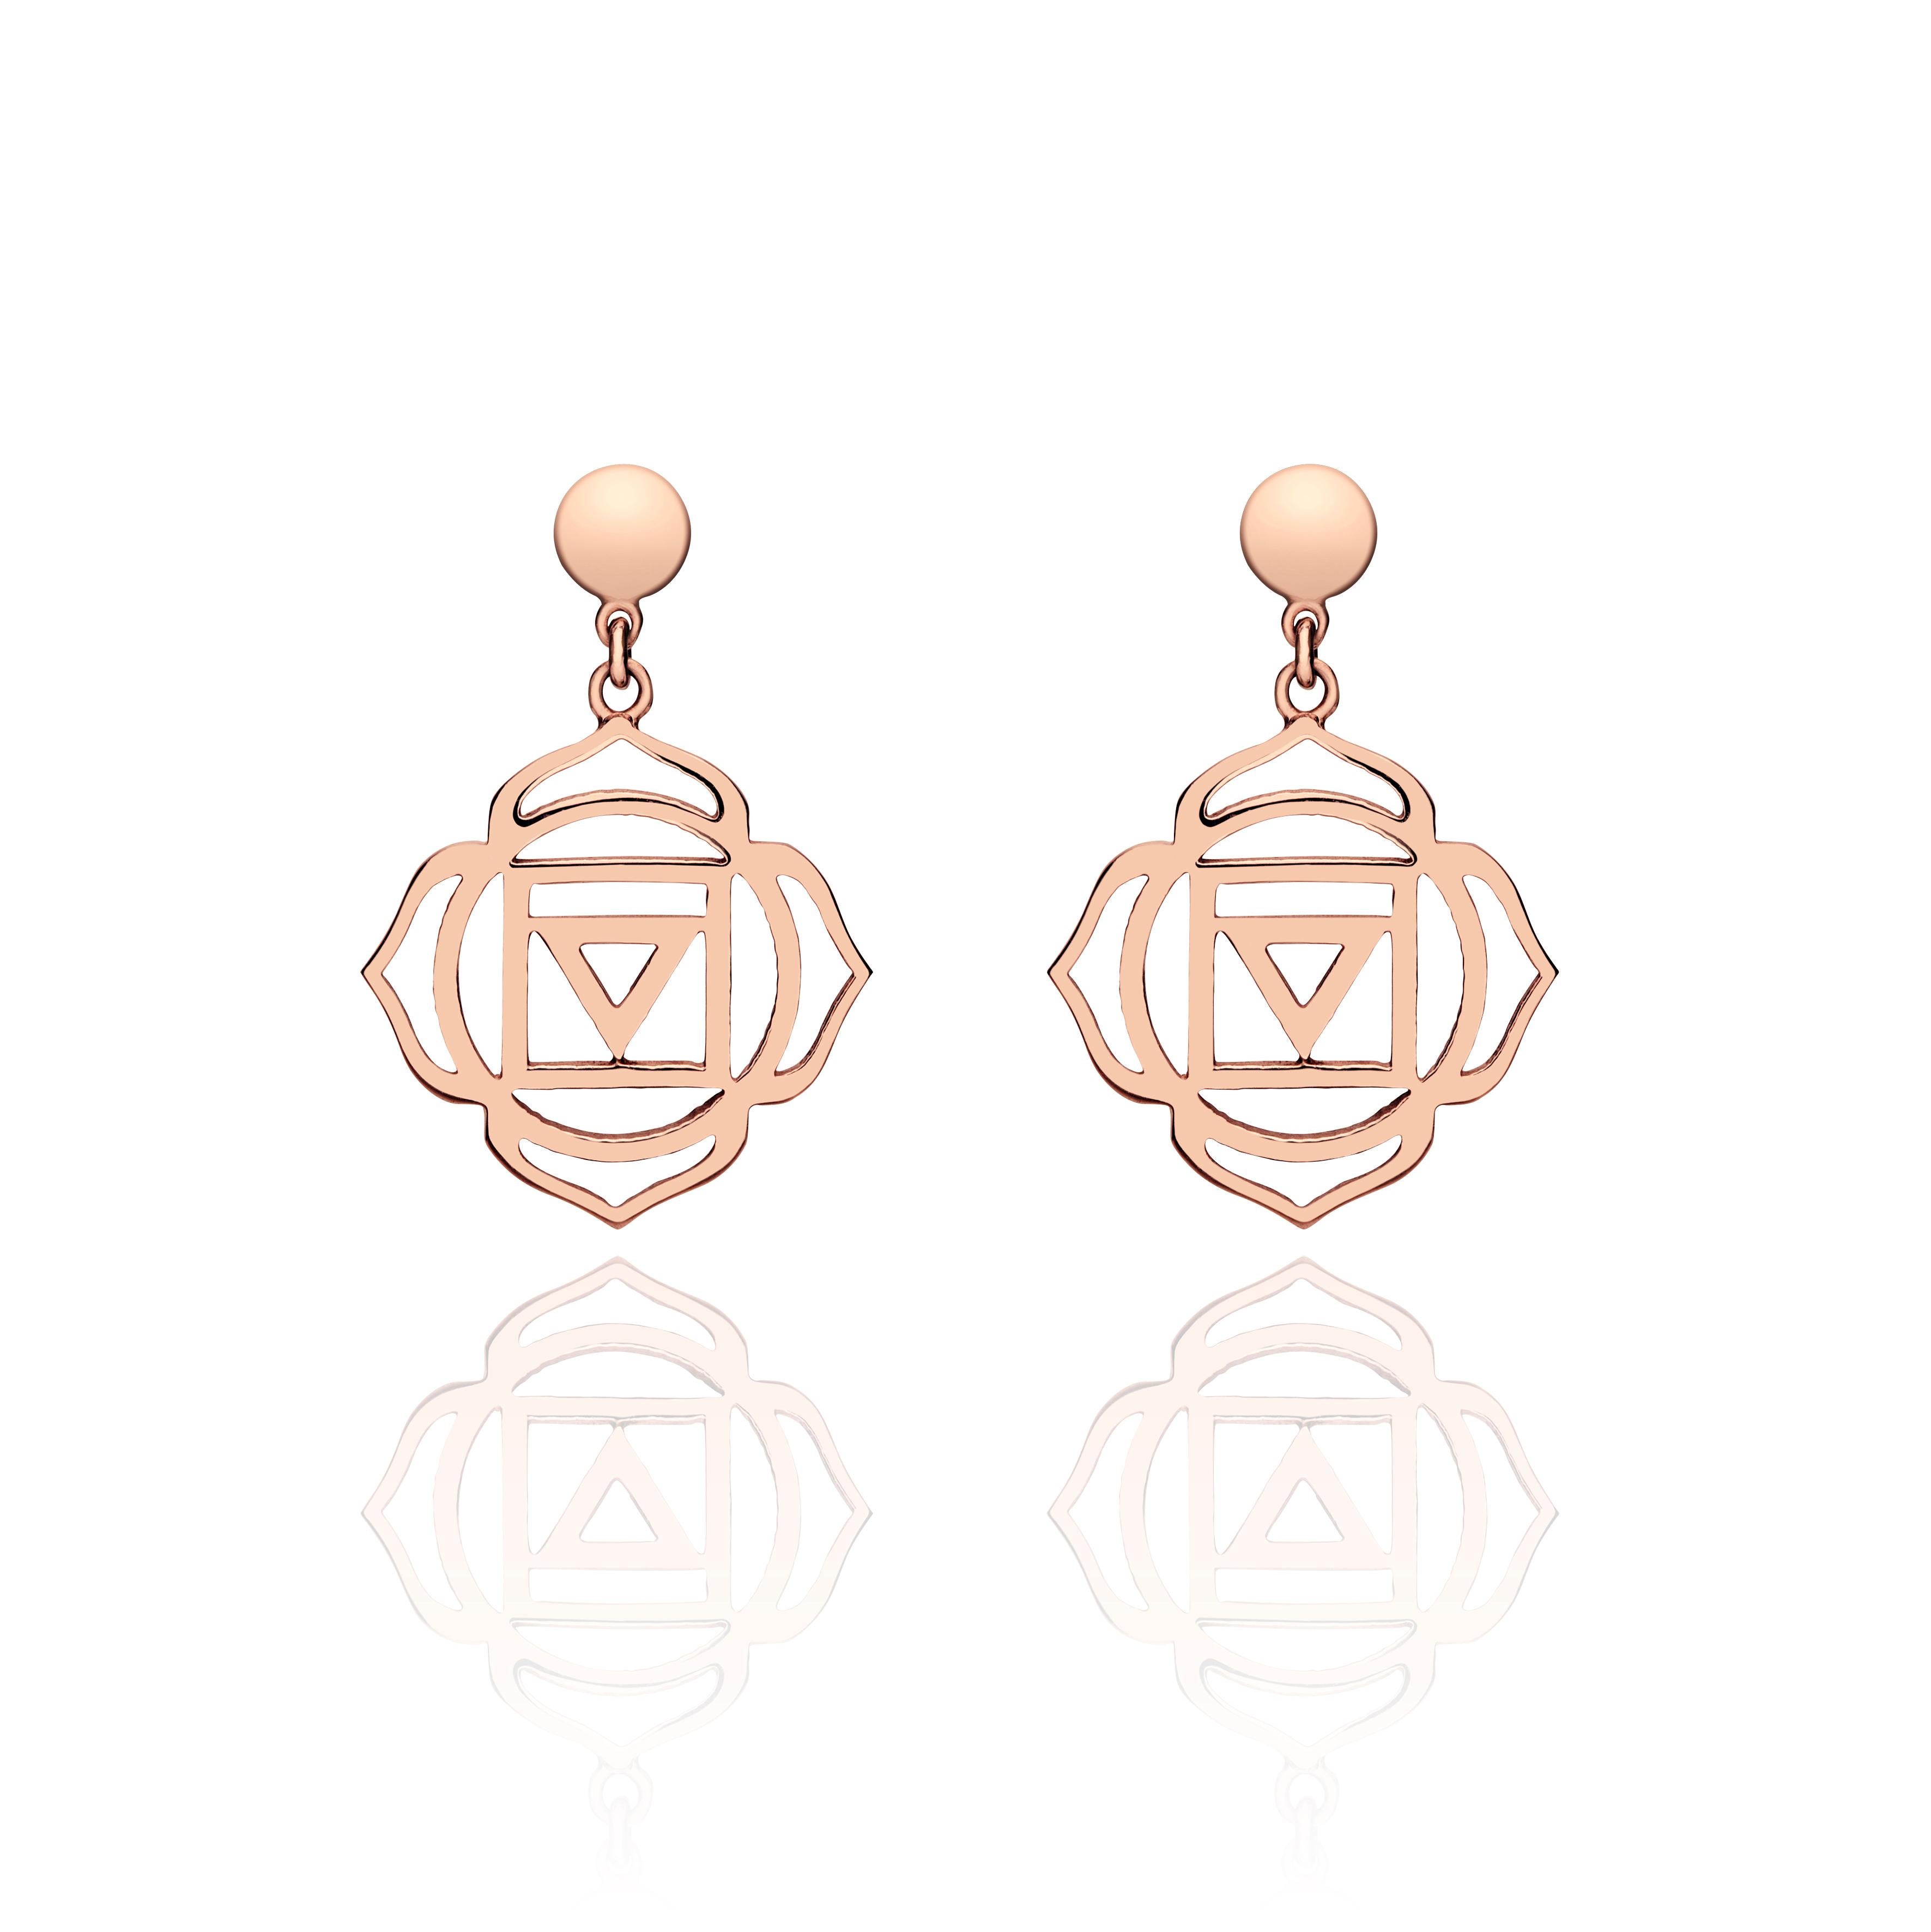 Unique drop pair of earrings with the Muladhara Chakra- The Root Chakra, handcrafted in 14Kt gold.
The Muladhara Chakra is the mental center of our body, that is located in the pelvic area. It is strongly connected with faith, patience and success